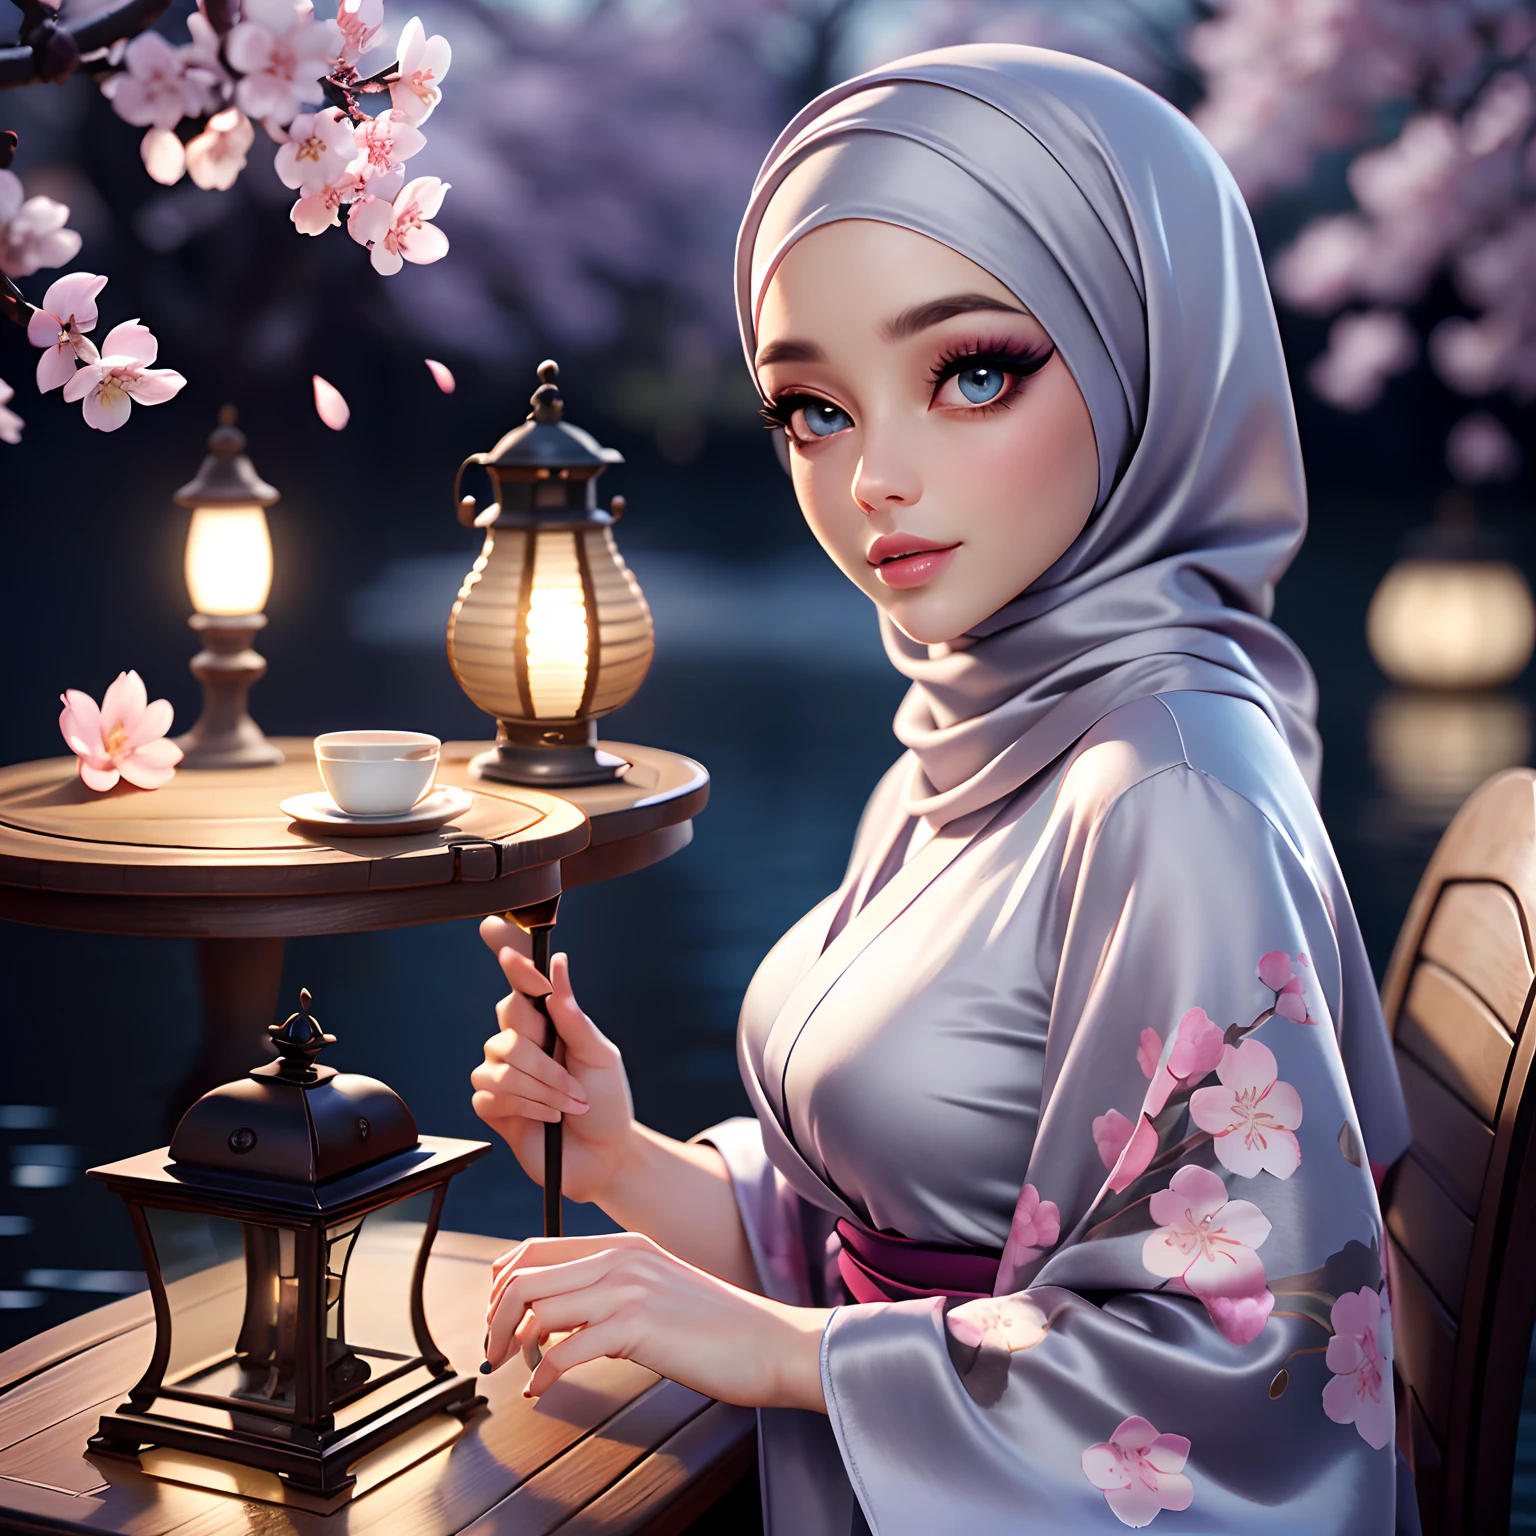 Masterpiece, Best Quality, 3D Rip Artwork, 3DMM Style, Close-up, Portrait, Realism, a woman beautifully makeup, eyeshadow, Parted Lips, Challenge Eye, beautiful big eyes, long eye lashes, wearing ((gray satin headscarf)), loosely tide hijab style, ((satin kimono)), sitting on a wrought iron bench in the center of a lush garden, springtime, Cherry blossoms, moonlight, shining water surface, Scattering cherry blossom petals、Lamp light、 lake